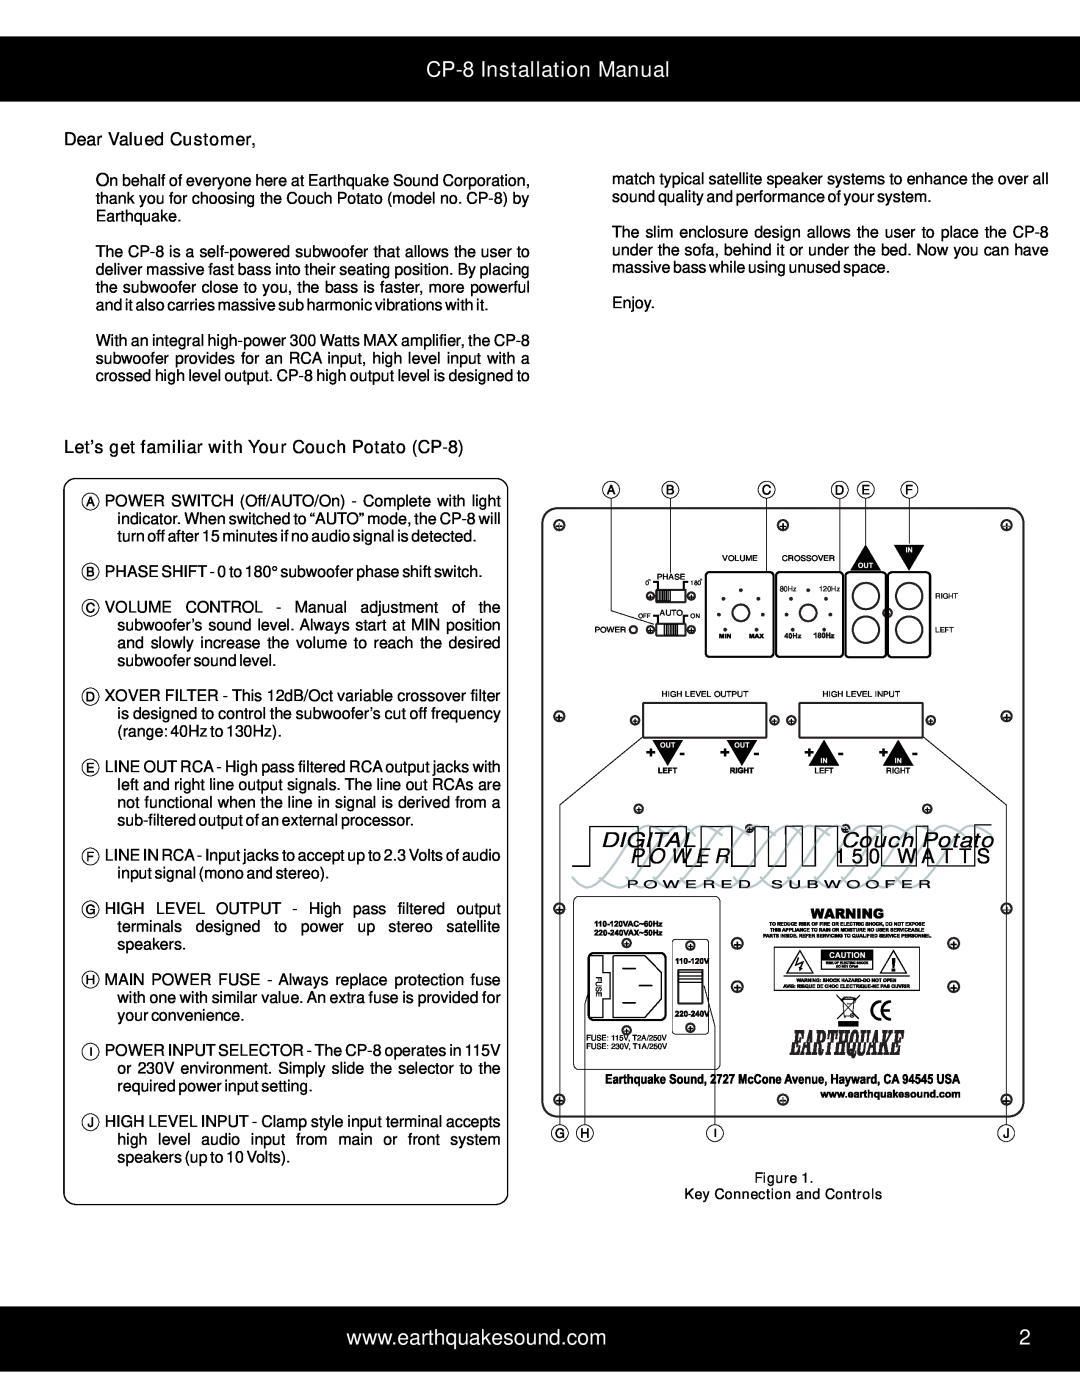 Earthquake Sound CP-8Installation Manual, Dear Valued Customer, Let’s get familiar with Your Couch Potato CP-8, Digital 